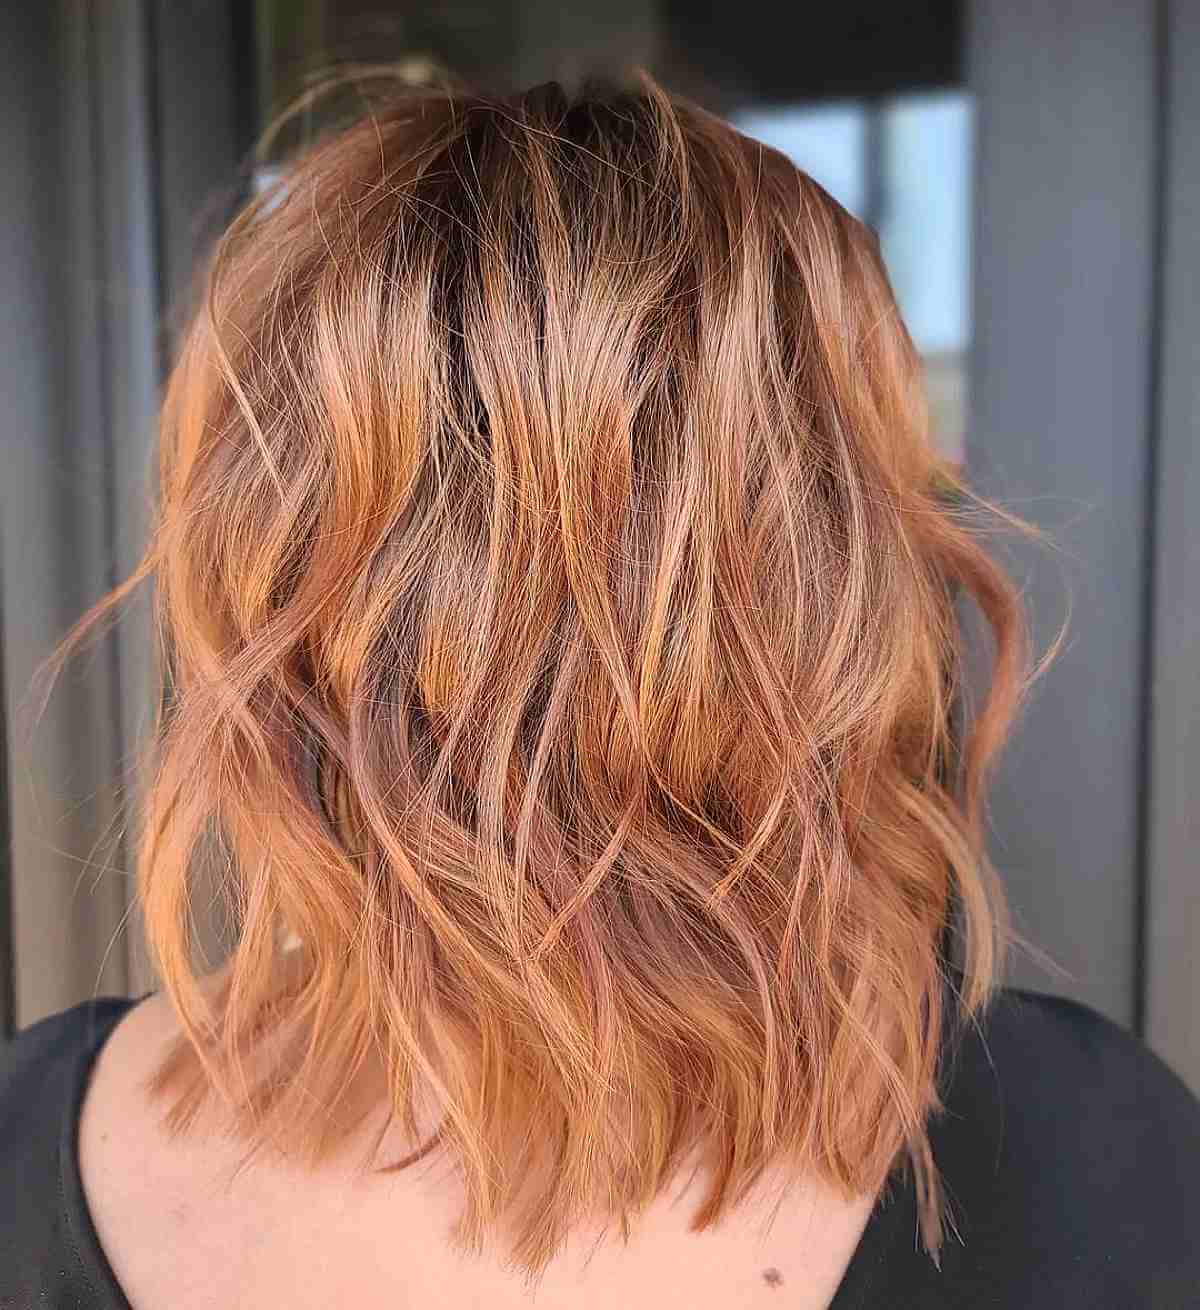 Ginger Peach with Subtle Lowlights for Autumn